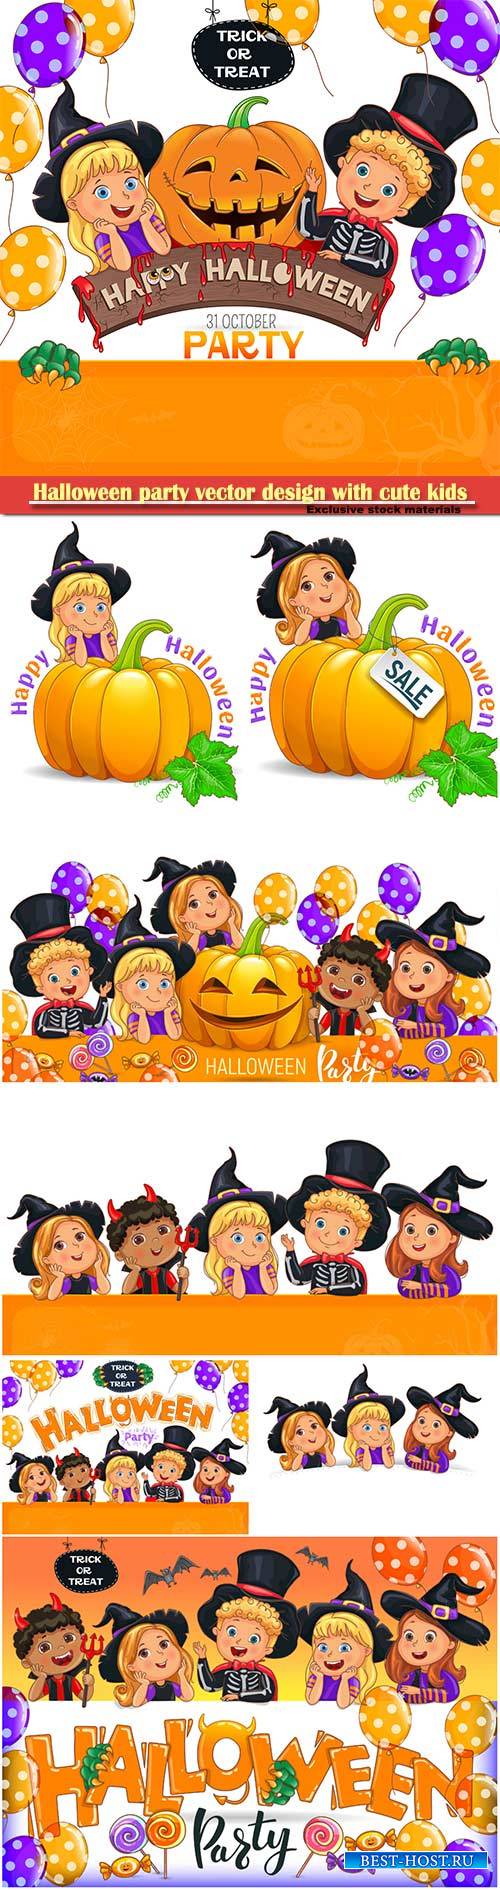 Halloween party vector design with cute kids